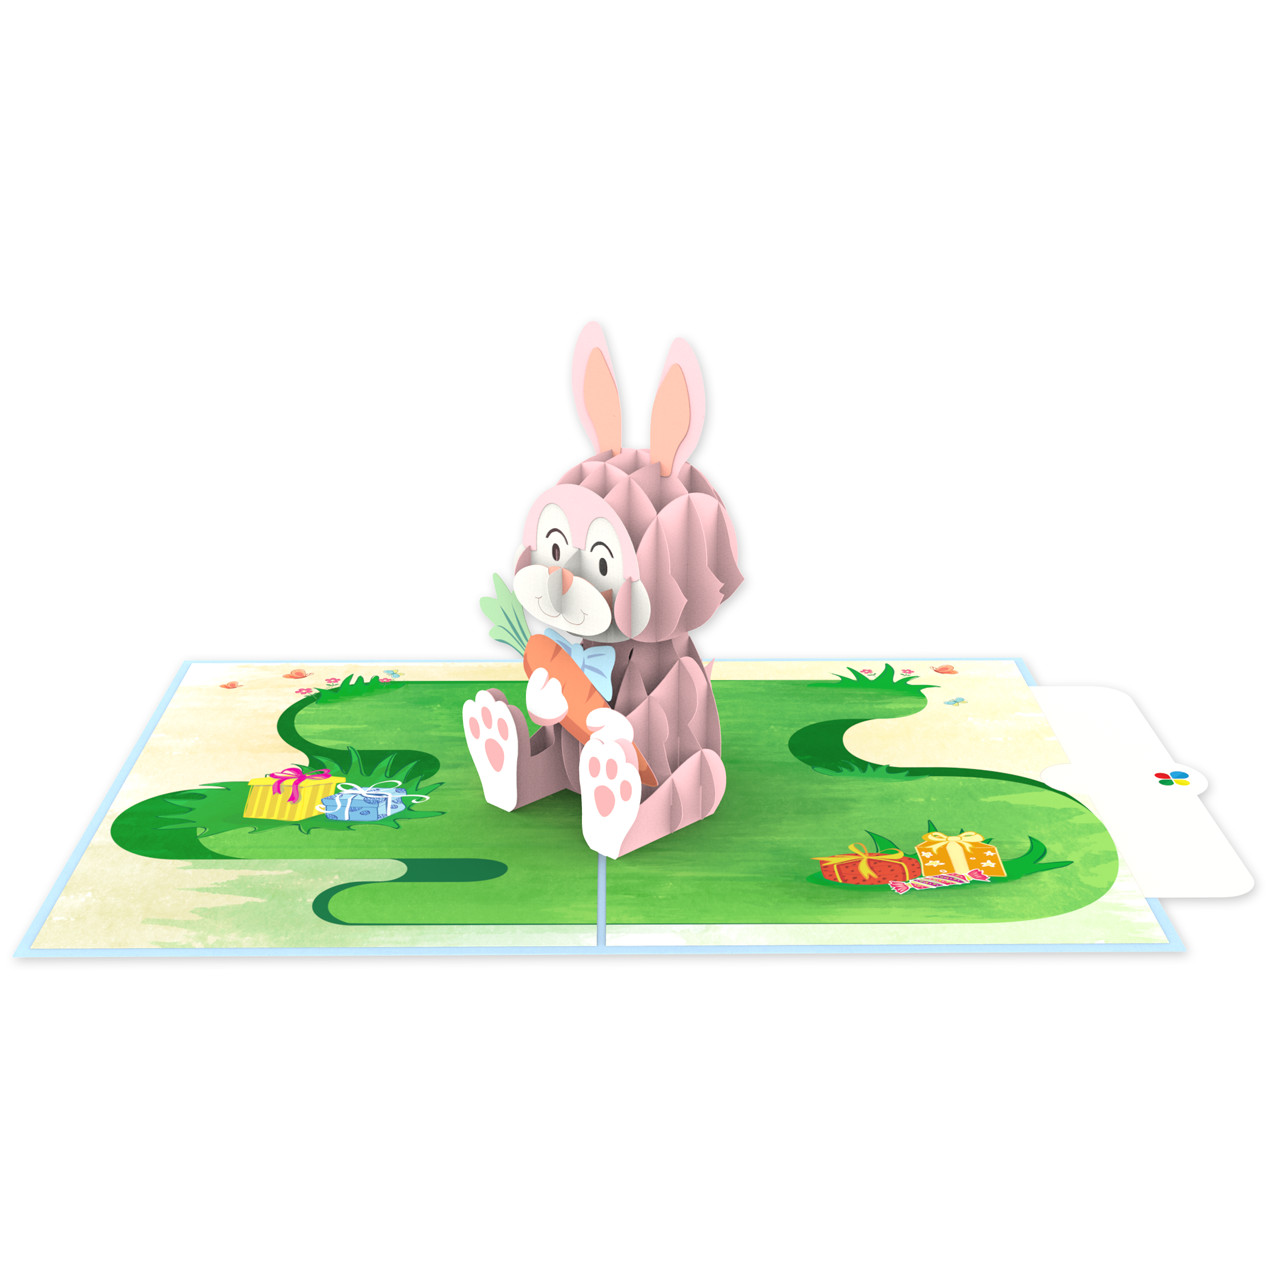 Thiệp 3D pop up Thỏ Bunny